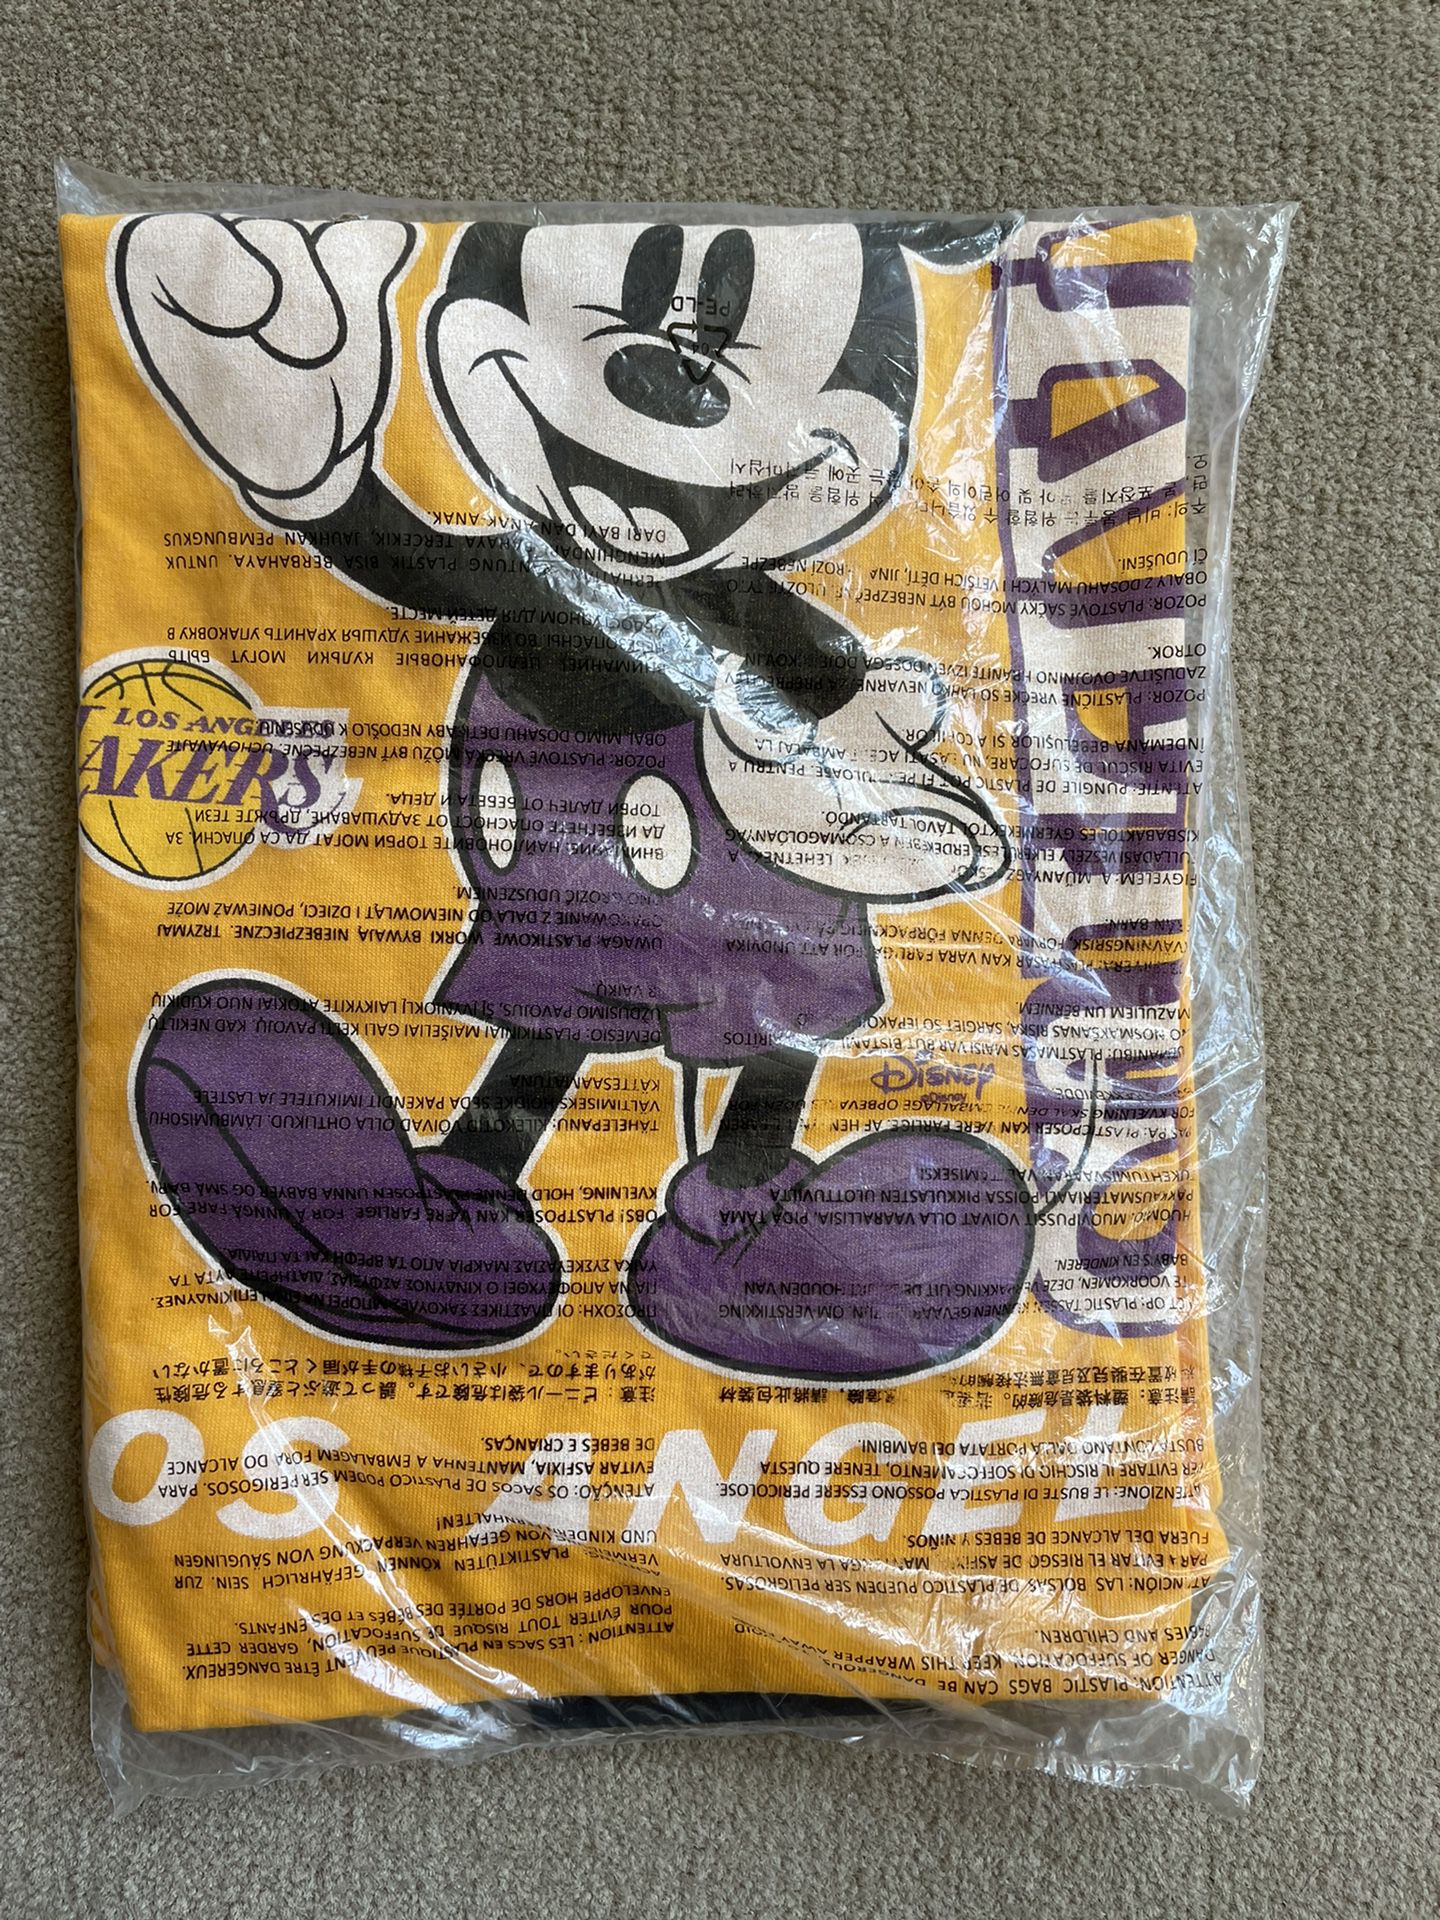 Los Angeles Lakers Junk Food Disney Mickey Mouse Baller T-Shirt